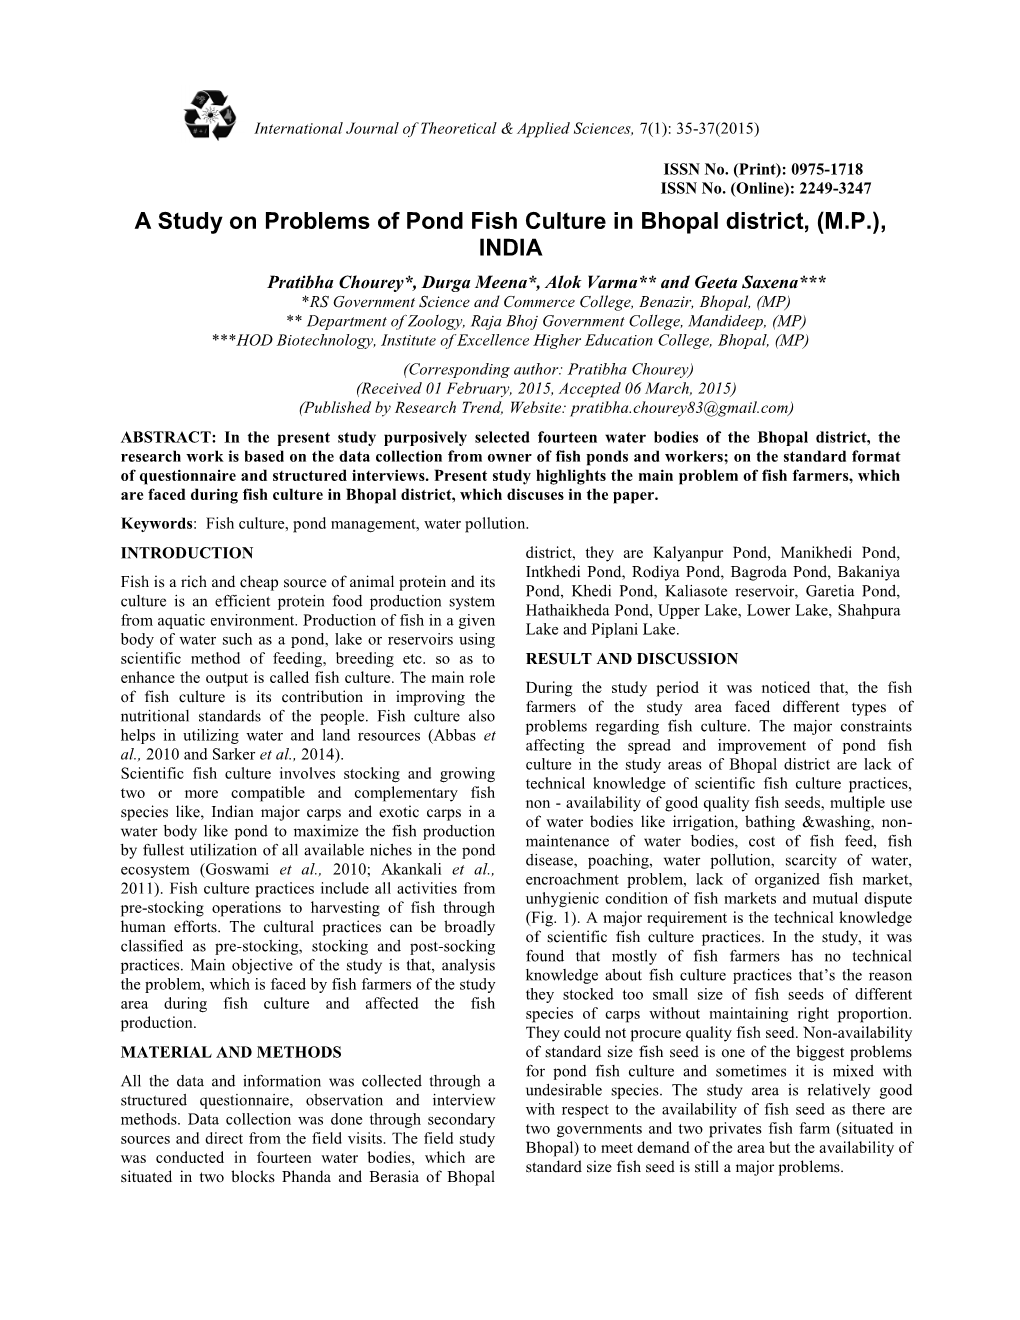 A Study on Problems of Pond Fish Culture in Bhopal District, (MP)